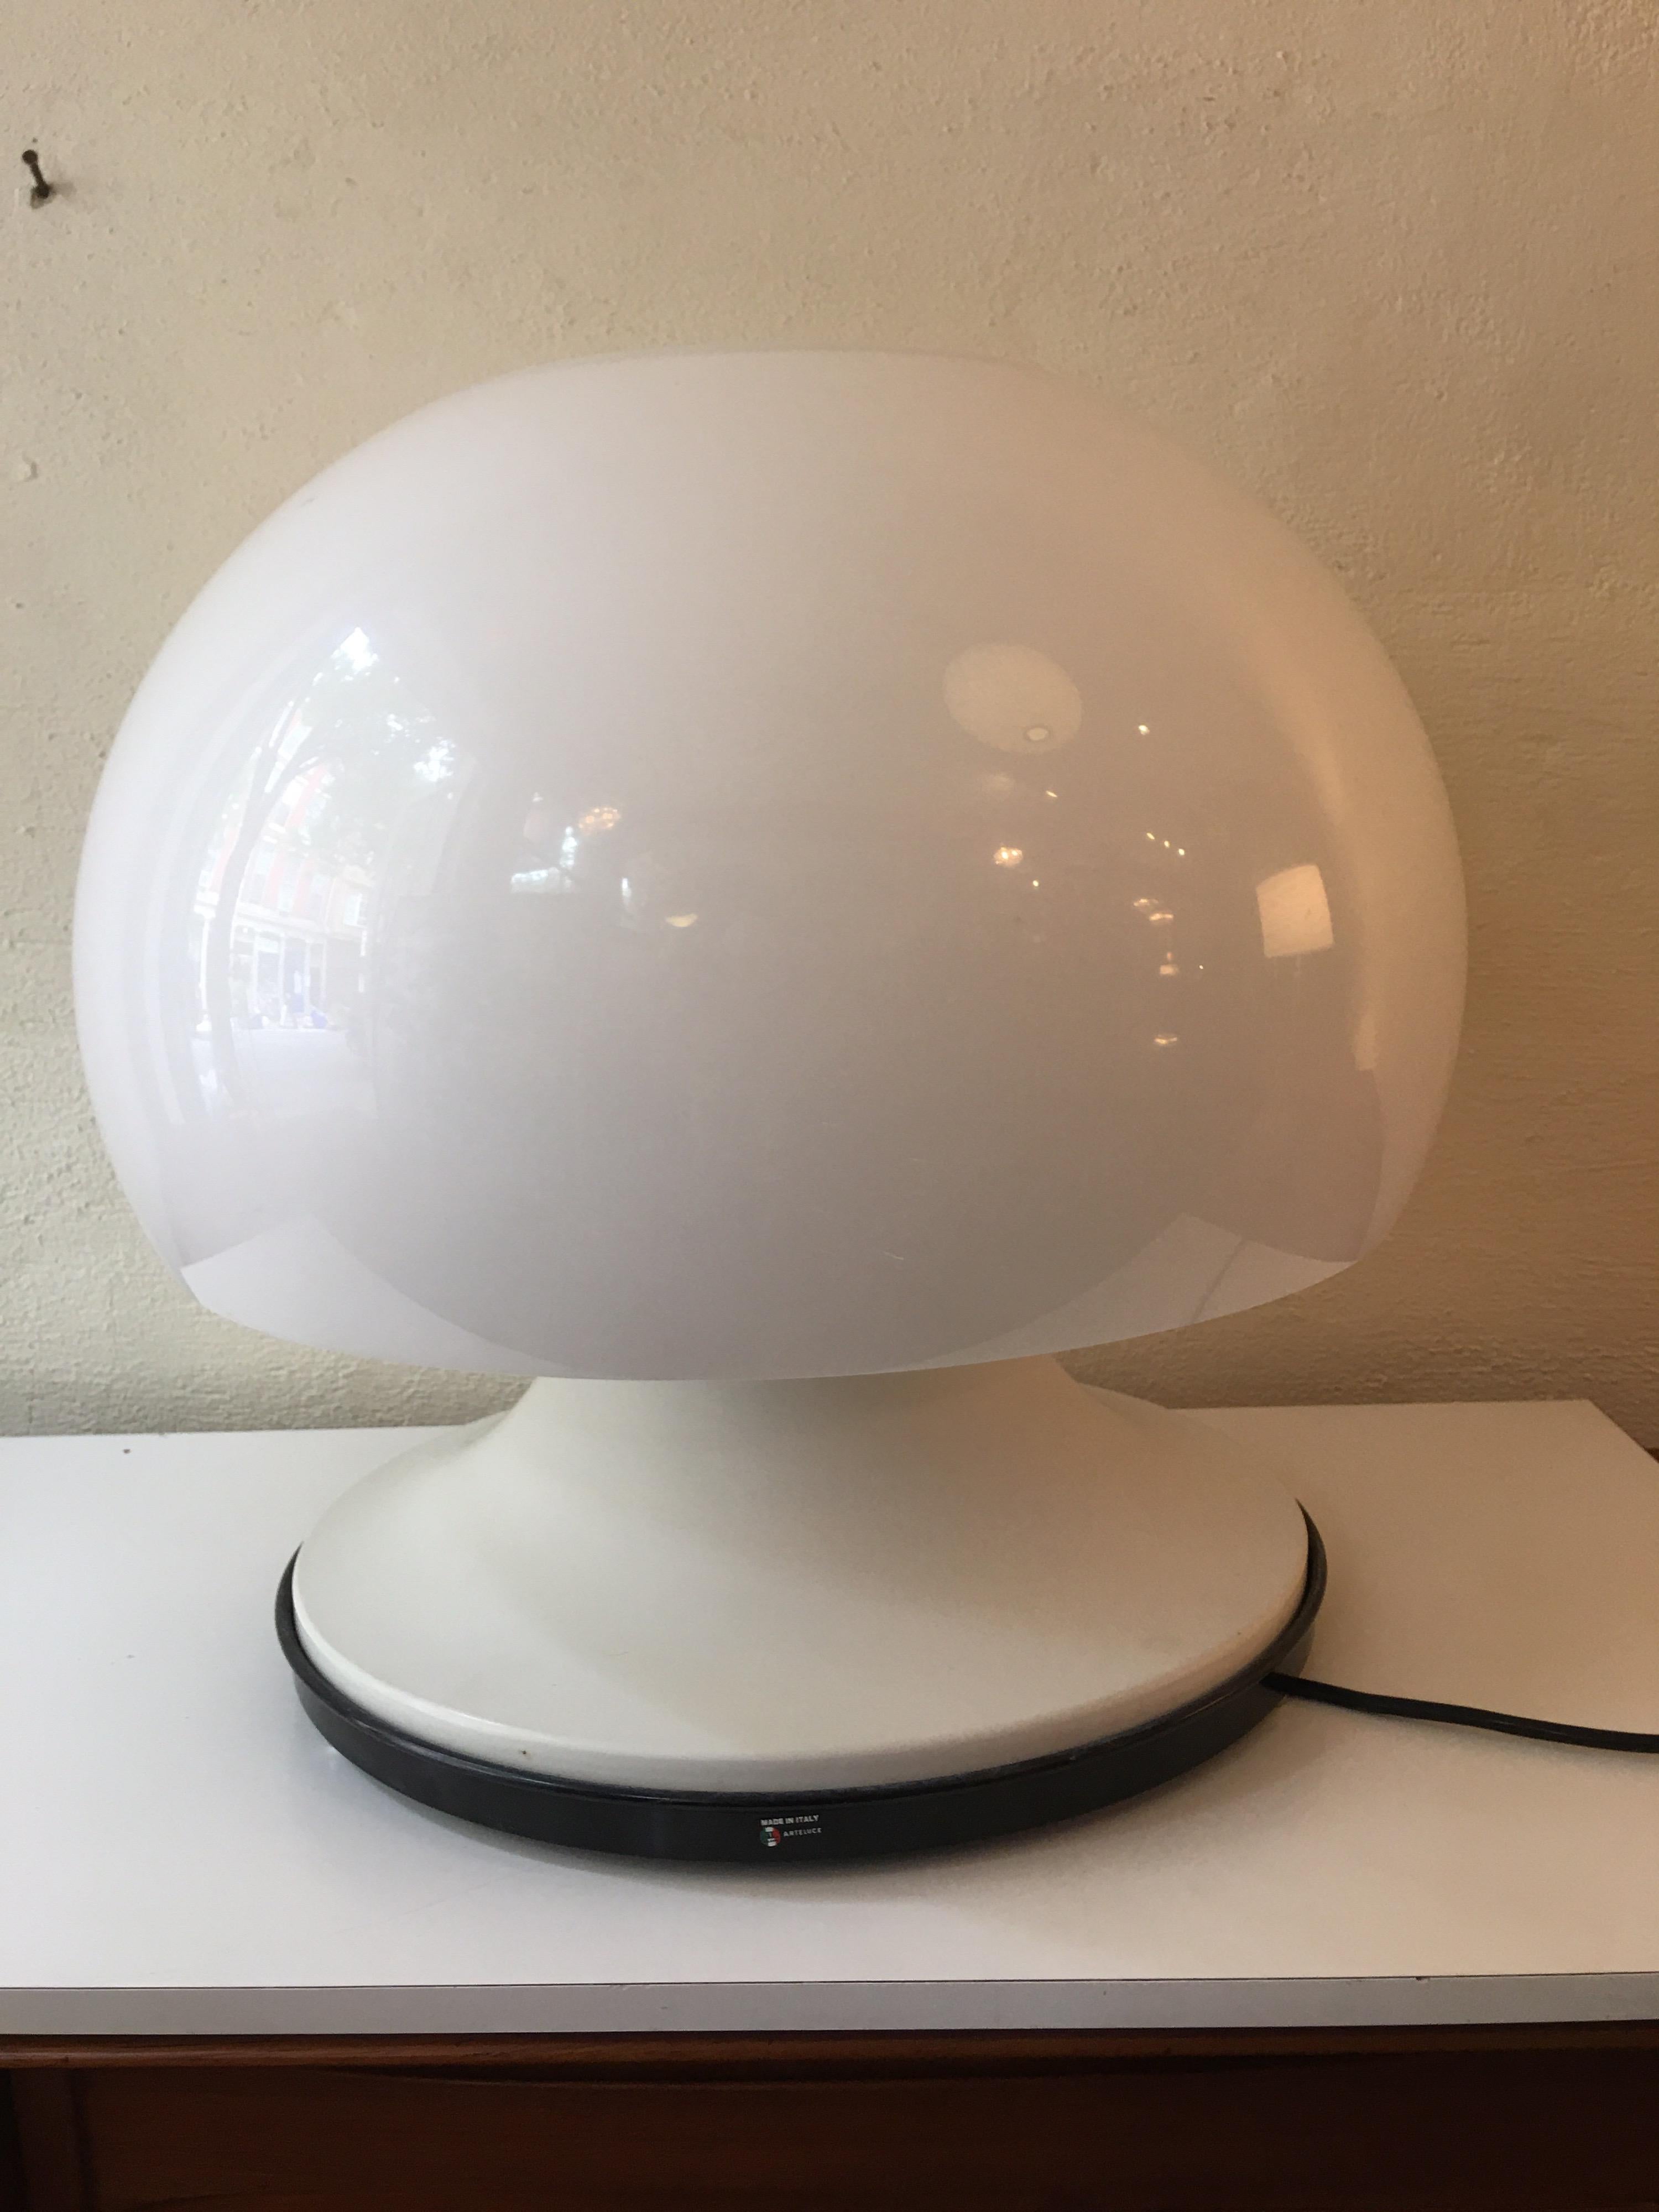 Gino Sarfatti Seldom seen Model 596 table lamp. Gino Saratti Started and Designed many Classic Lamp Designs for Areluce. His designs shaped the Italian Design Movement! He was the first to use many of the new materials that are now considered